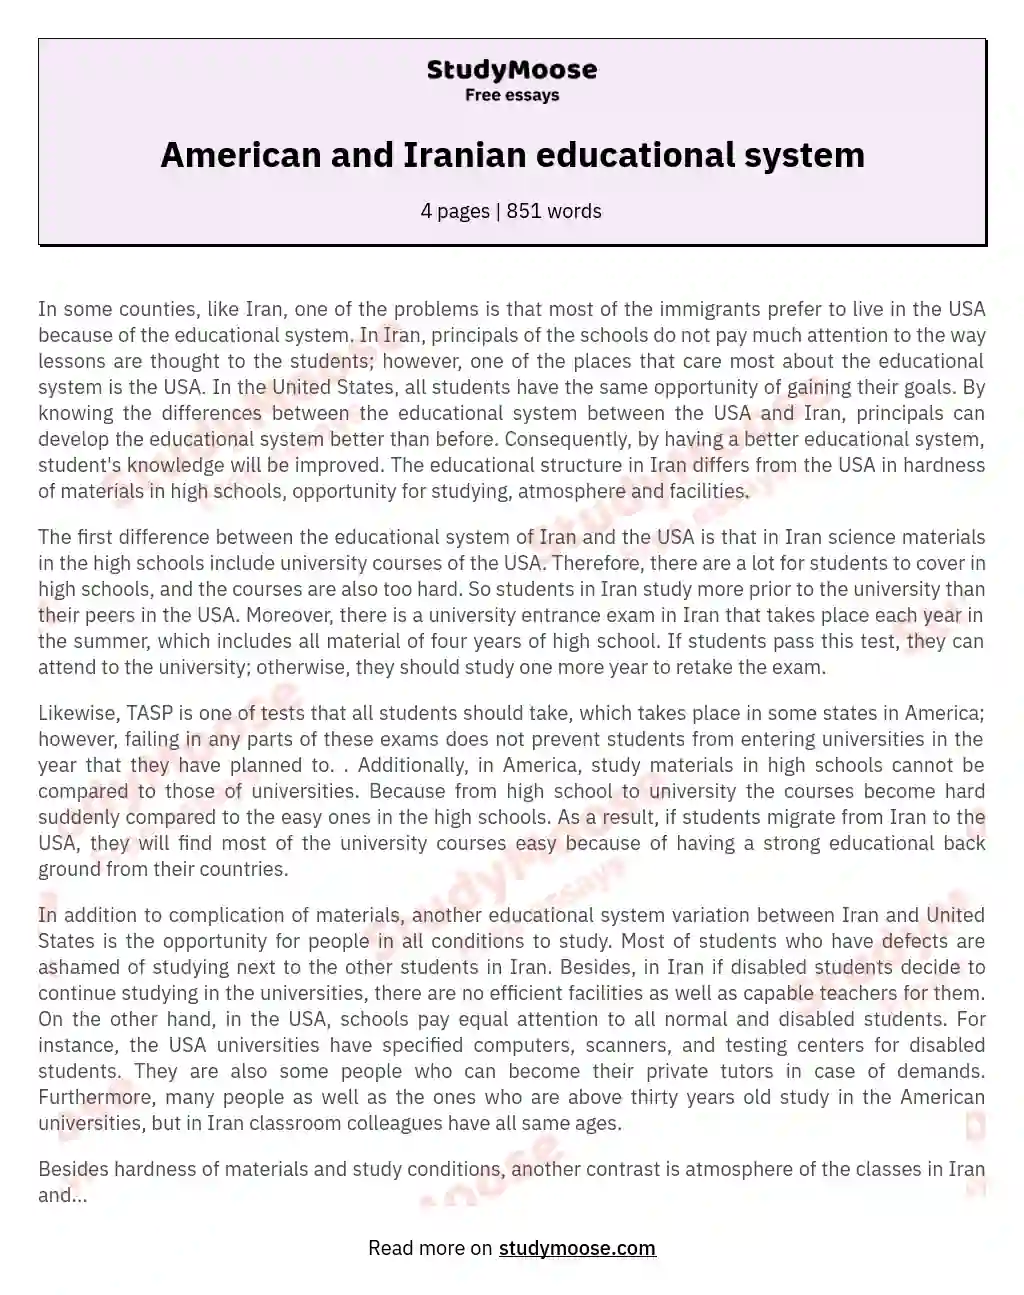 American and Iranian educational system essay